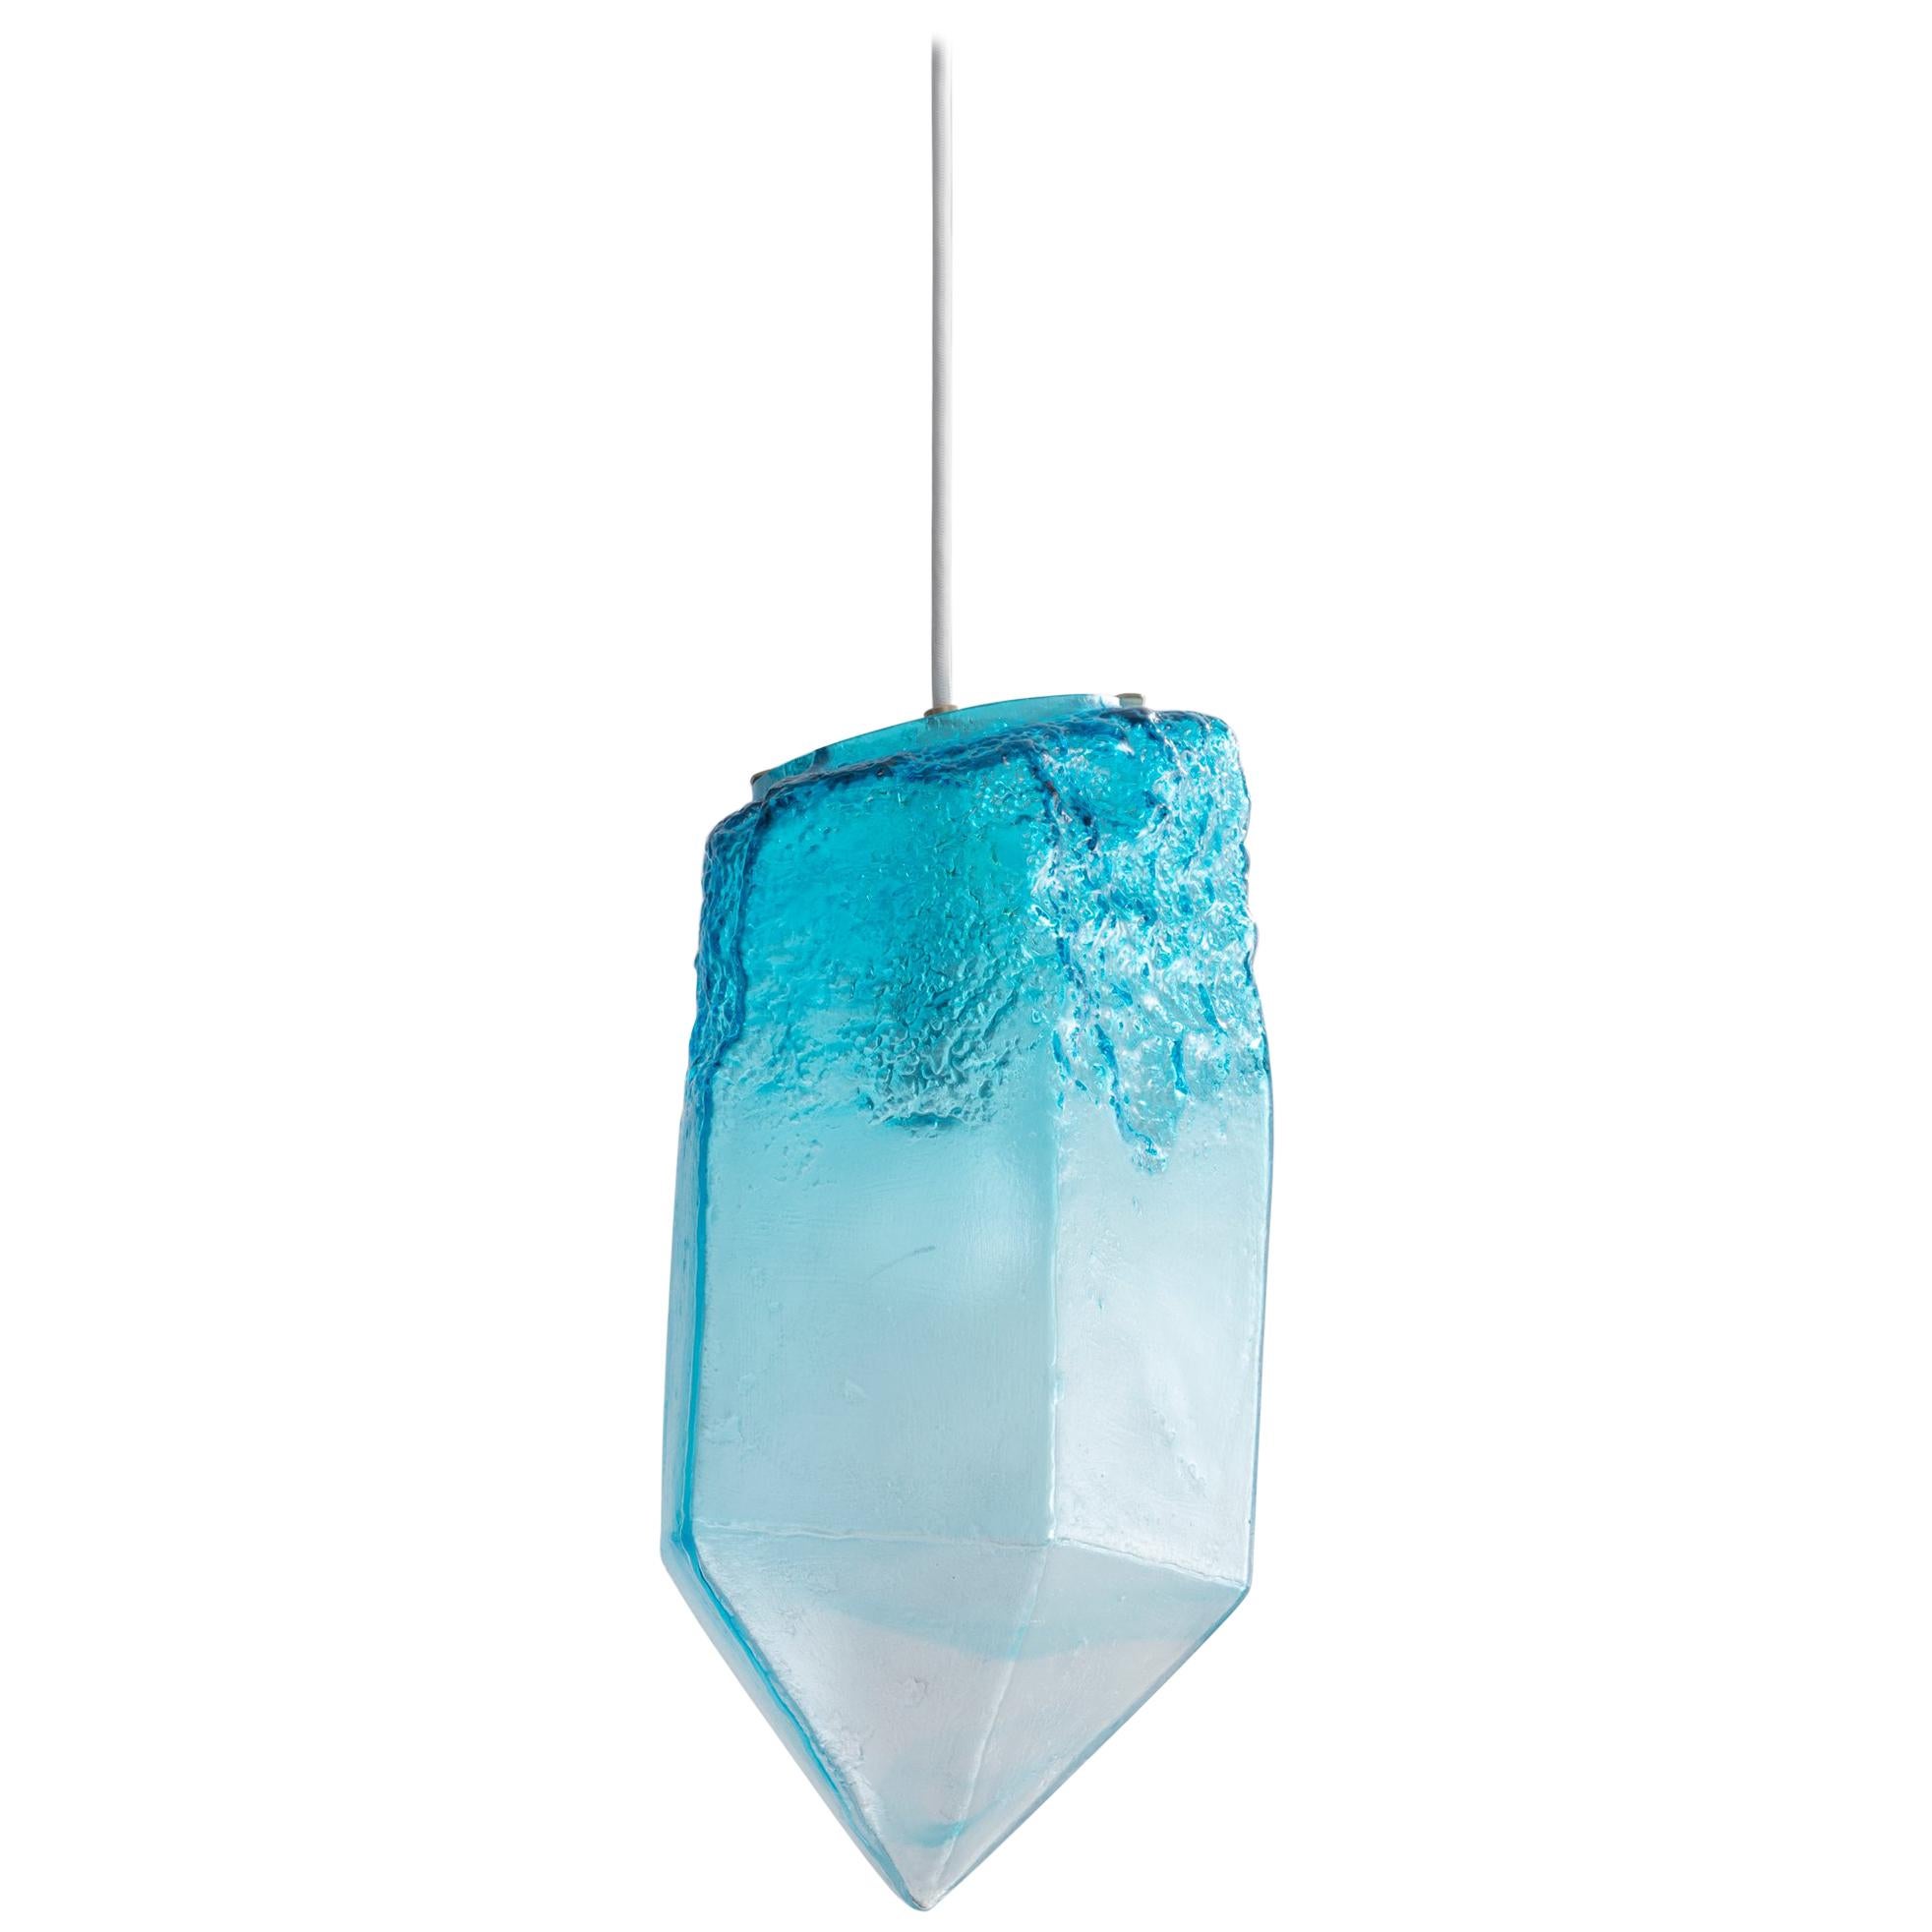 Sculptural Pendant Light in Turquoise Glass by Jeff Zimmerman, 2016